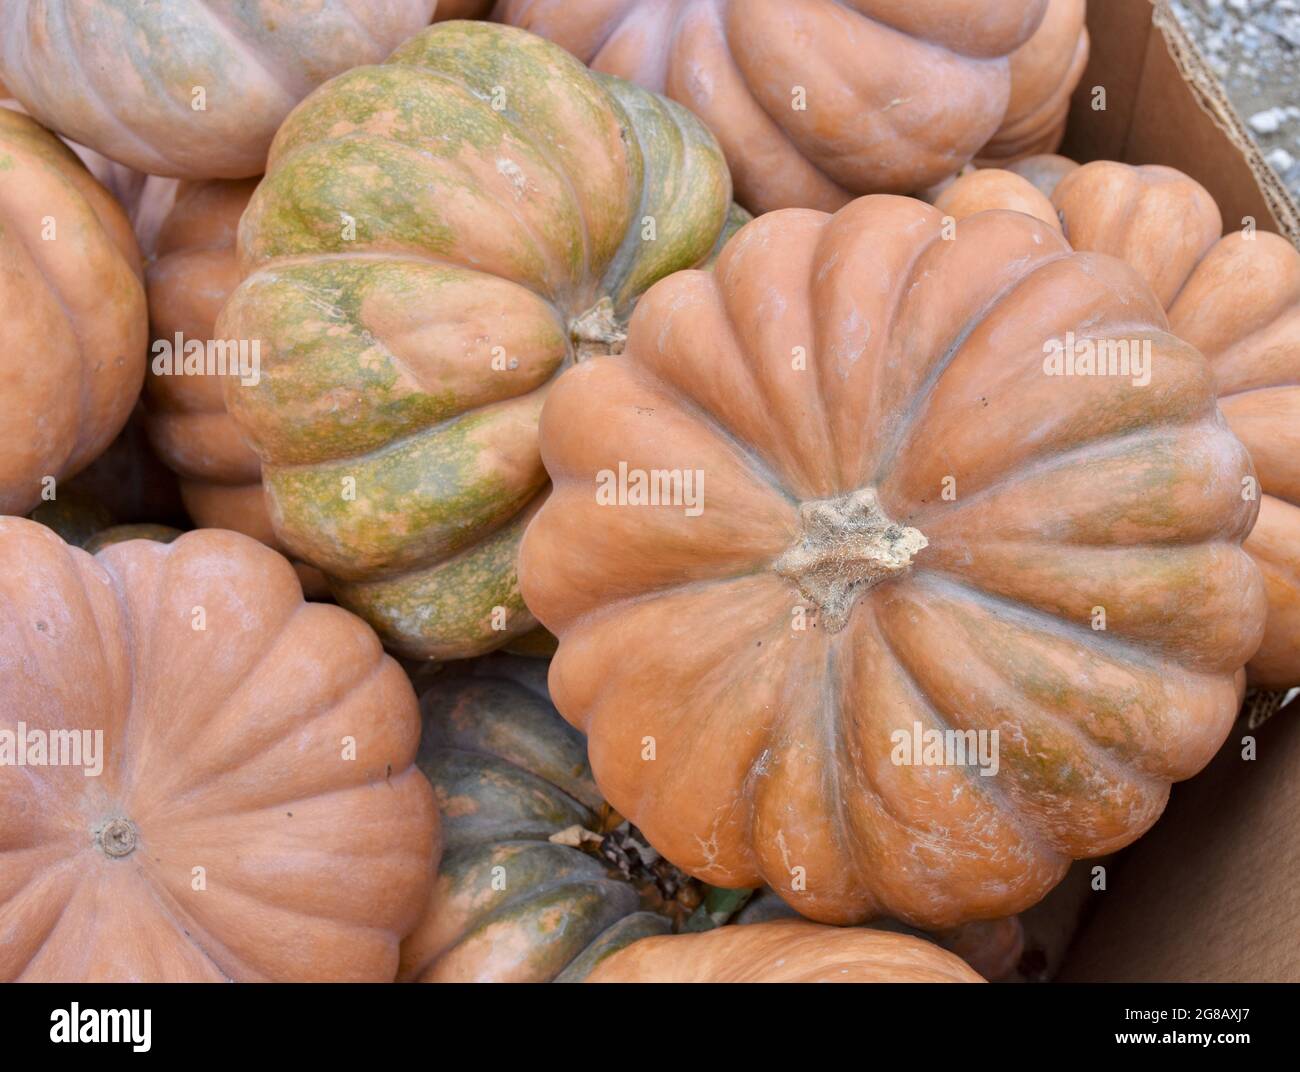 The Long Island cheese pumpkin is an old heirloom variety and its sweet, smooth flesh is known to make superior pumpkin pie. Stock Photo